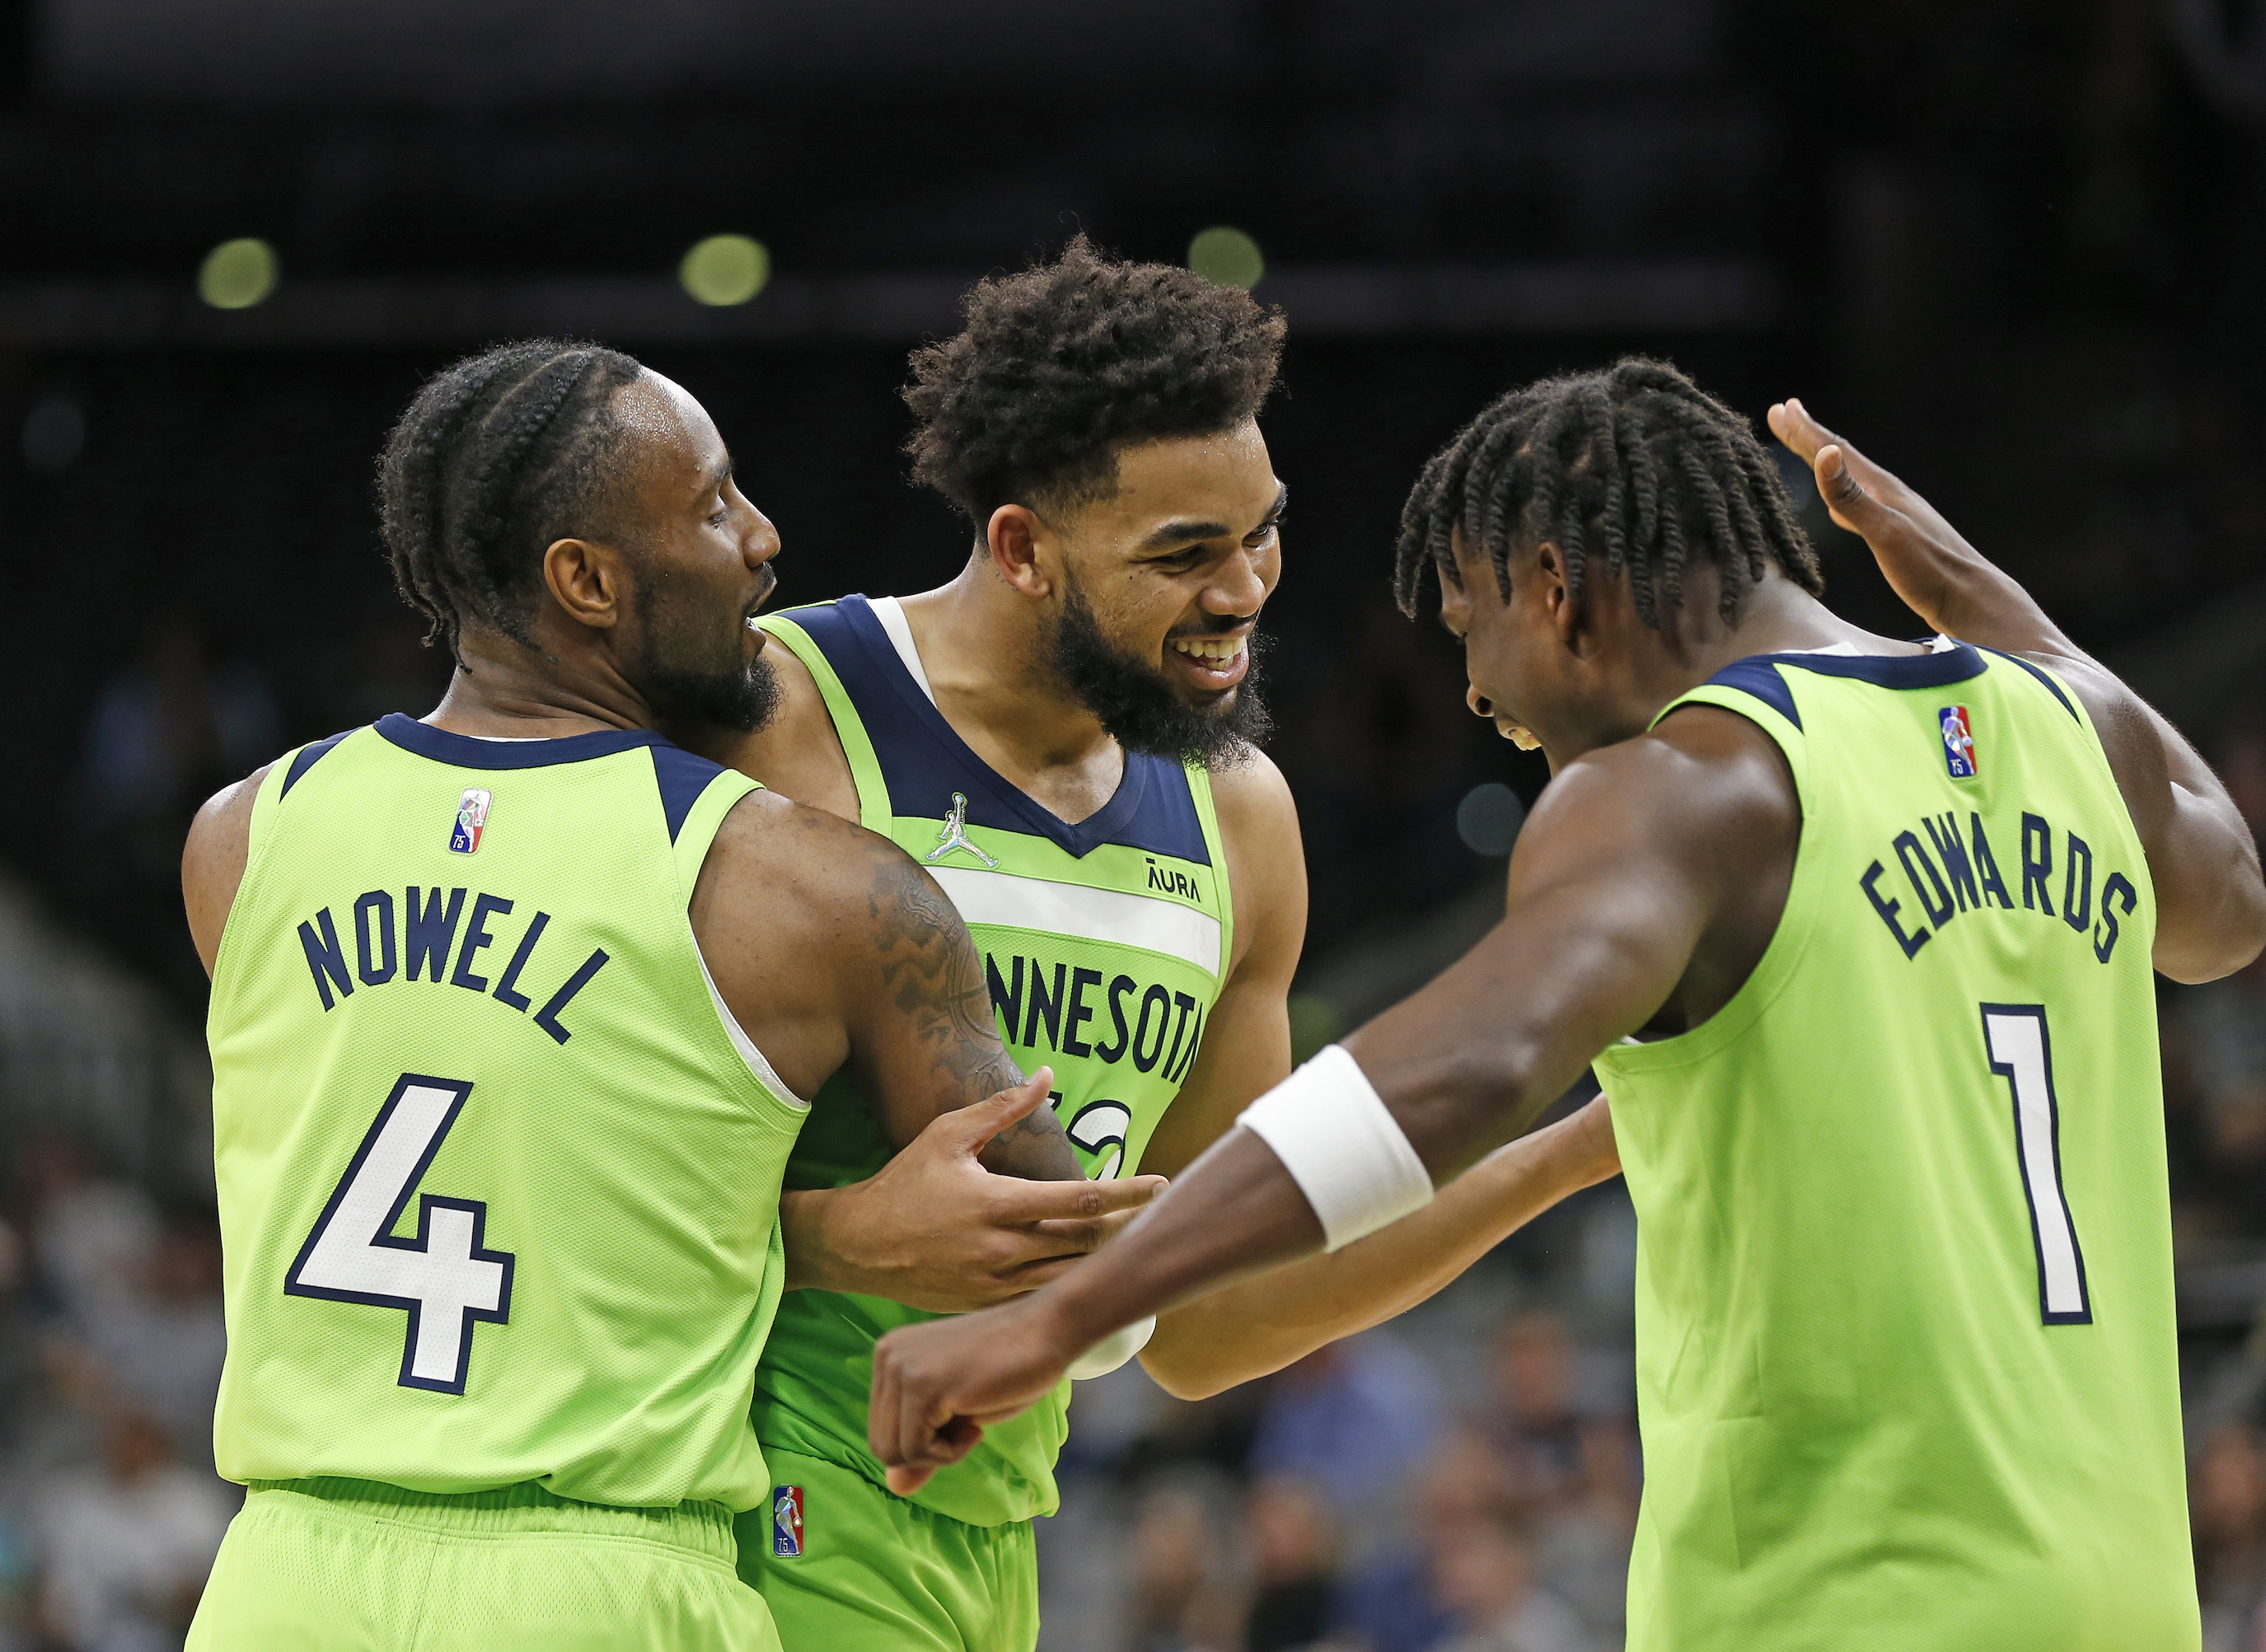 Minnesota Timberwolves star Karl-Anthony Towns (center) celebrates with teammates after scoring 60 points in an NBA game against the San Antonio Spurs in March 2022